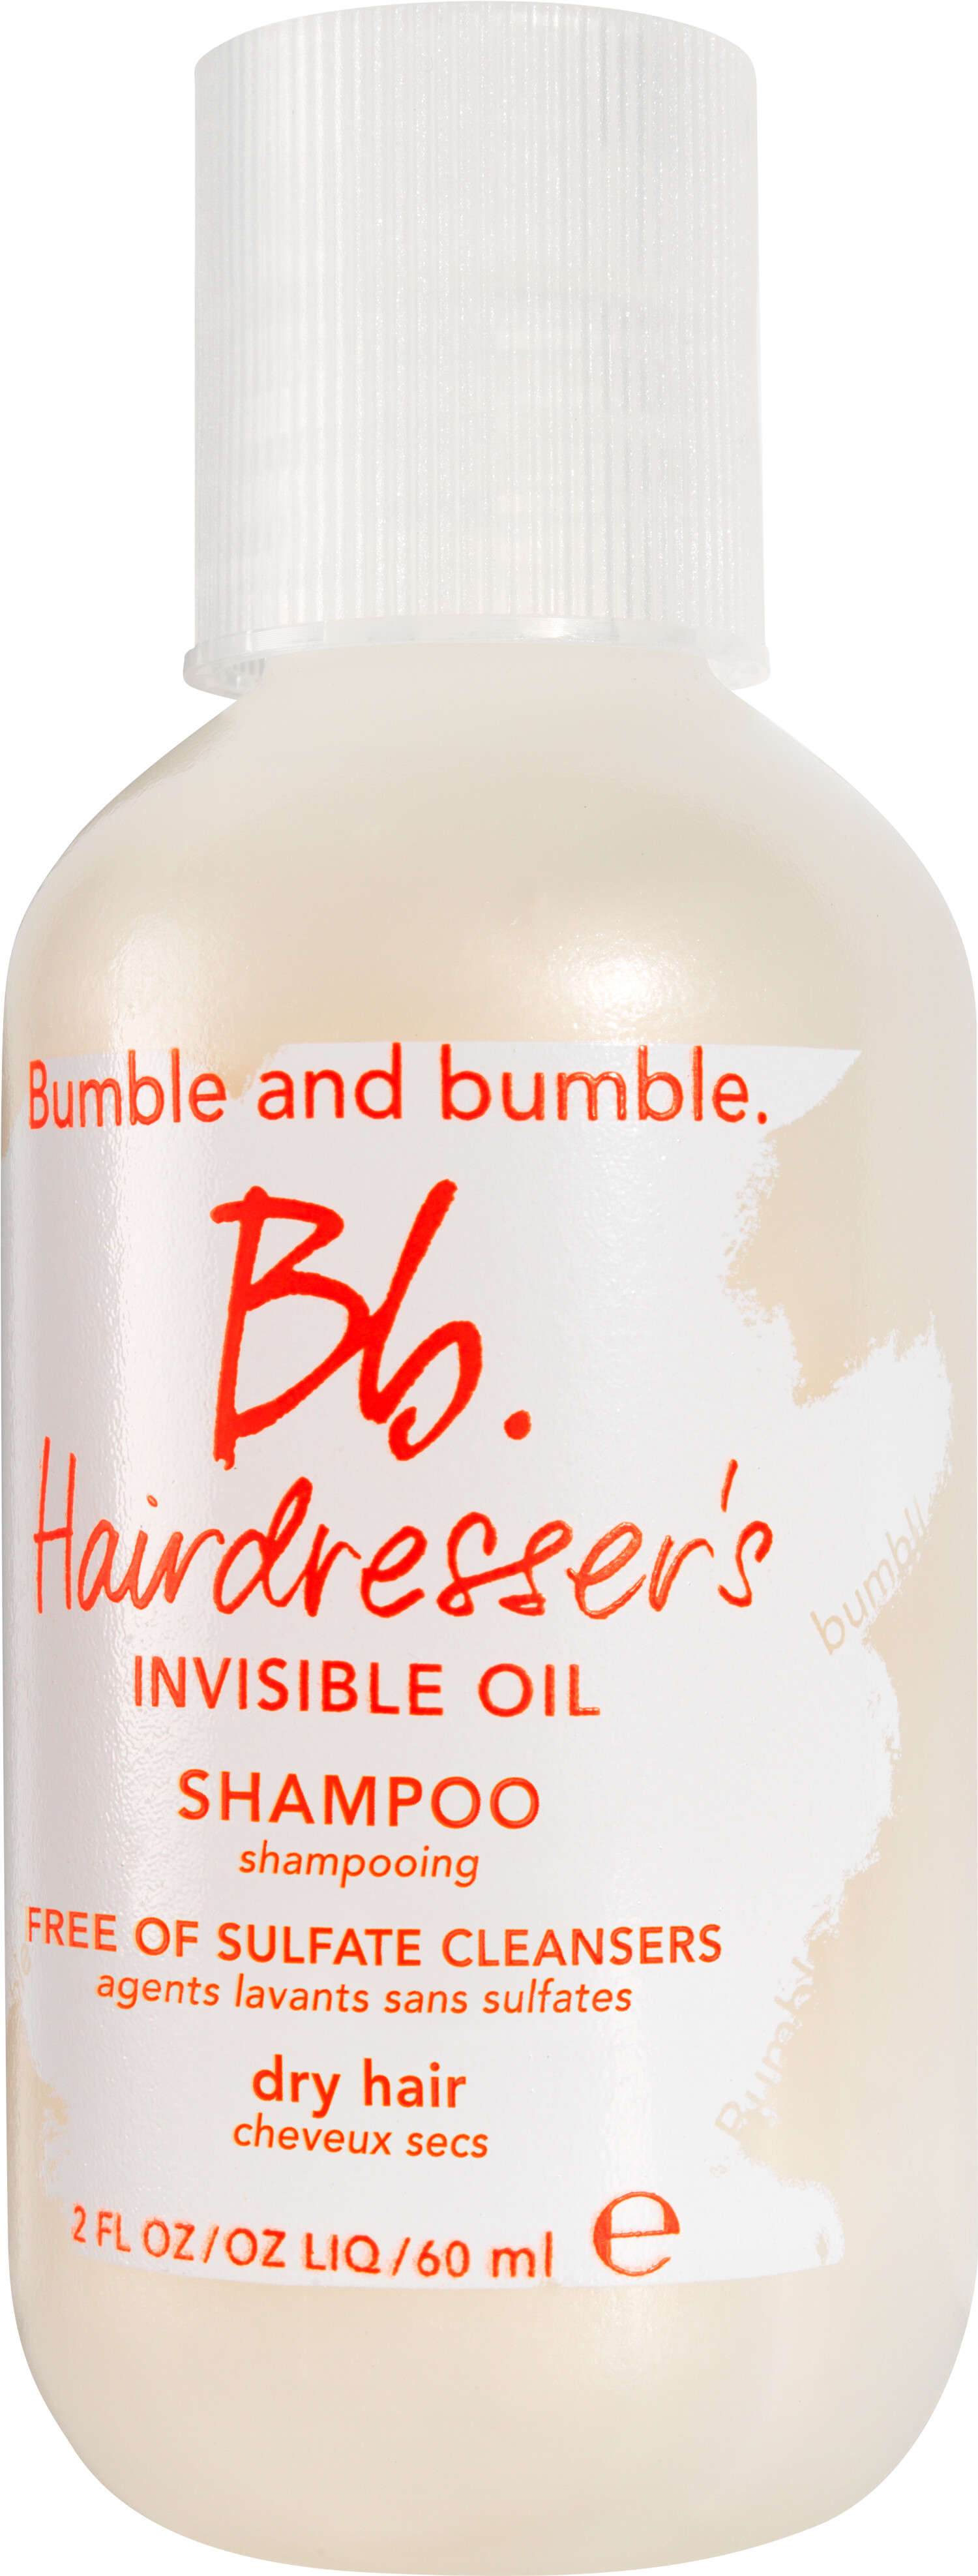 Bumble and bumble Hairdresser's Invisible Oil Shampoo 60ml Trial Size